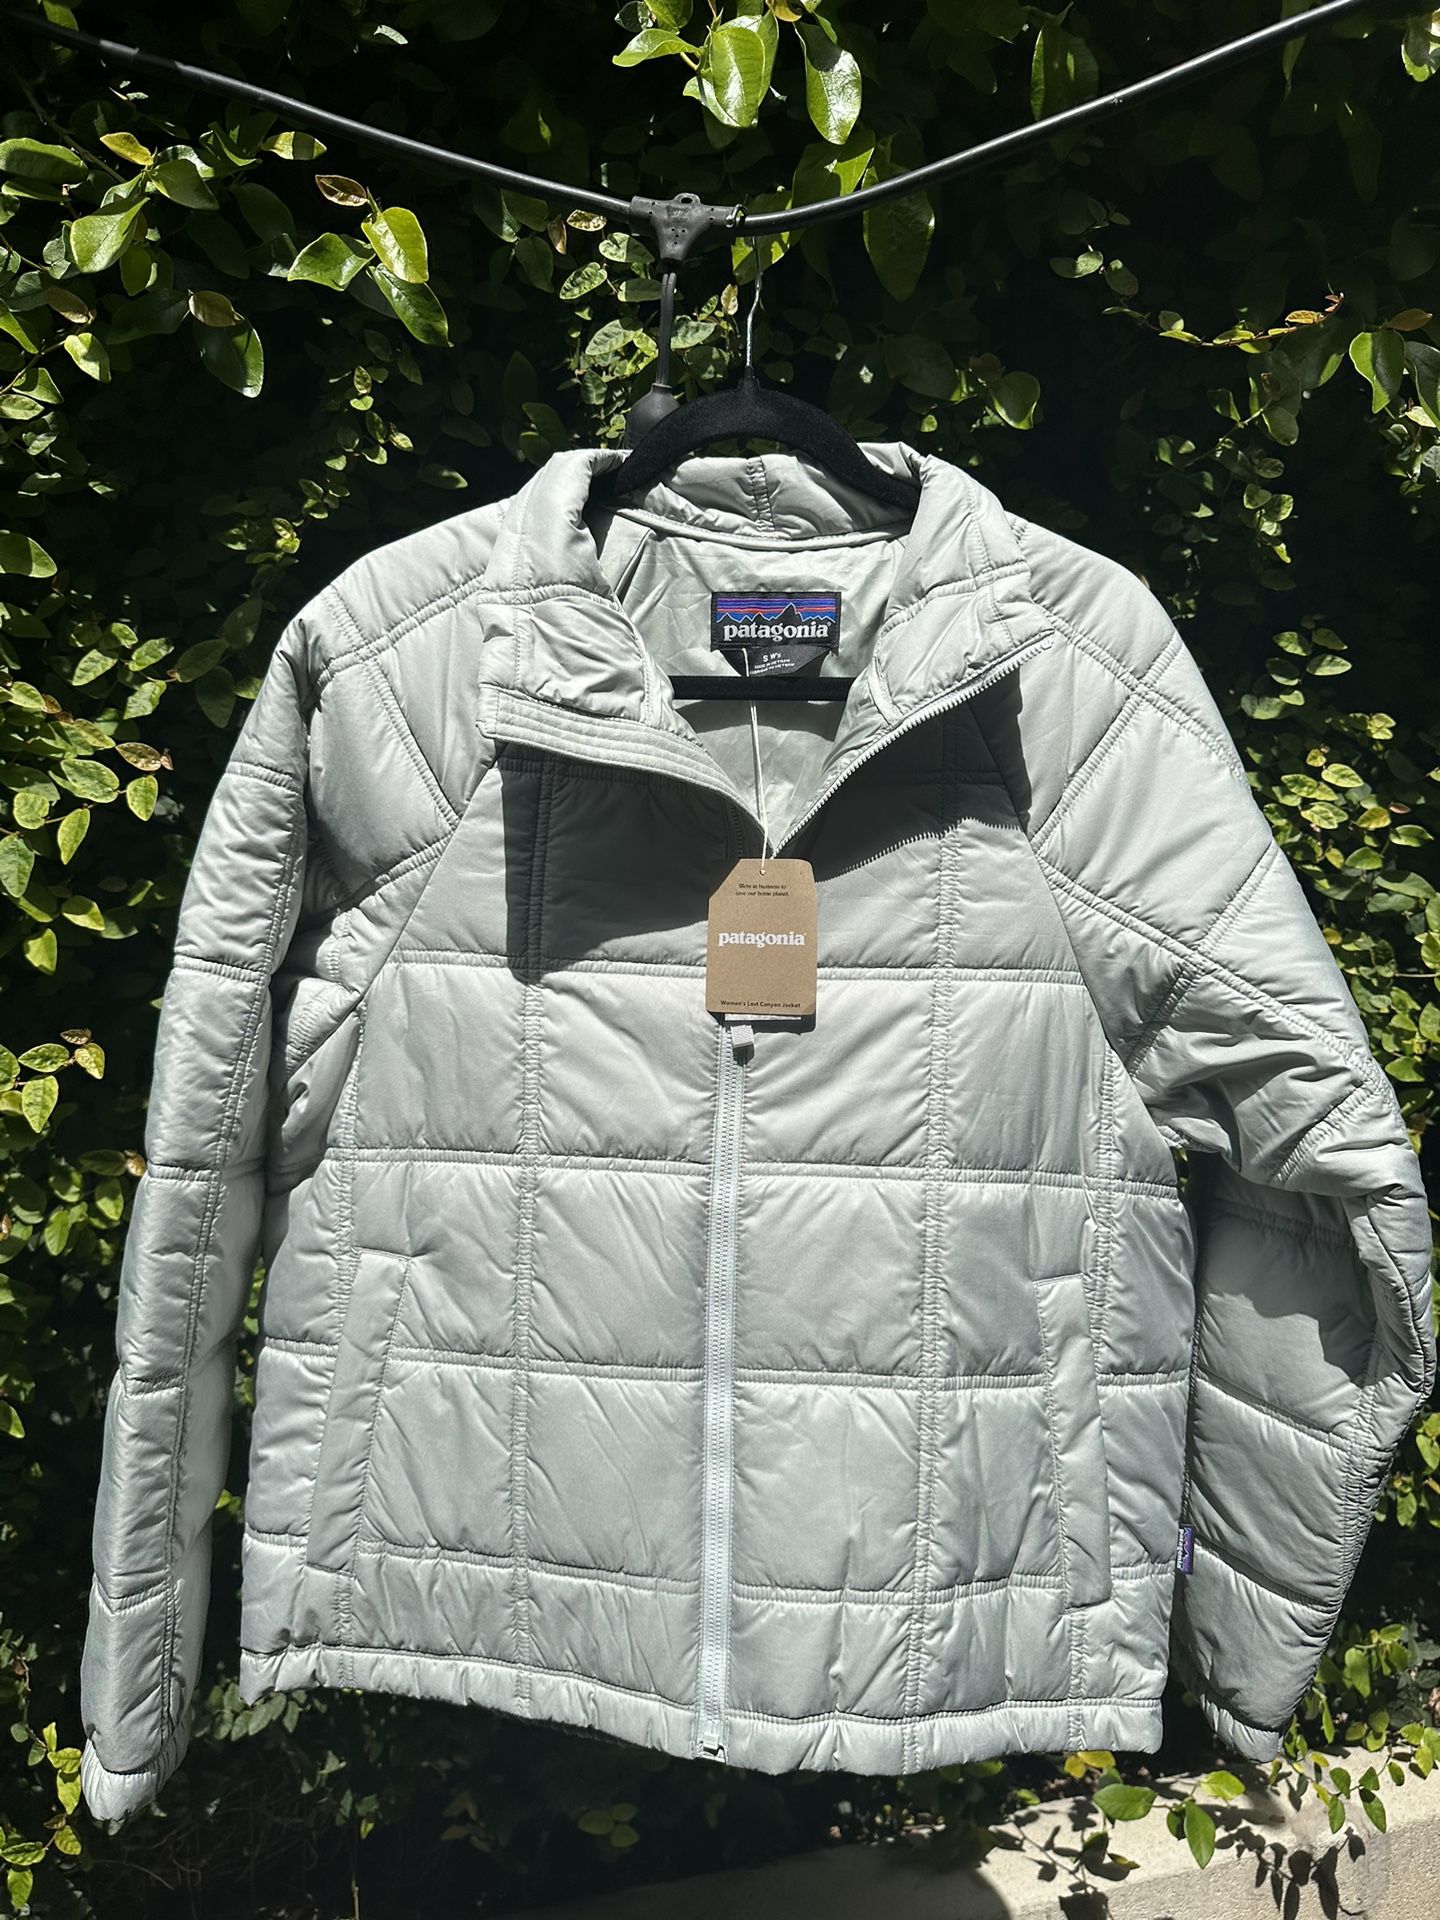 NEW: Patagonia Women’s Lost  Canyon Size SM